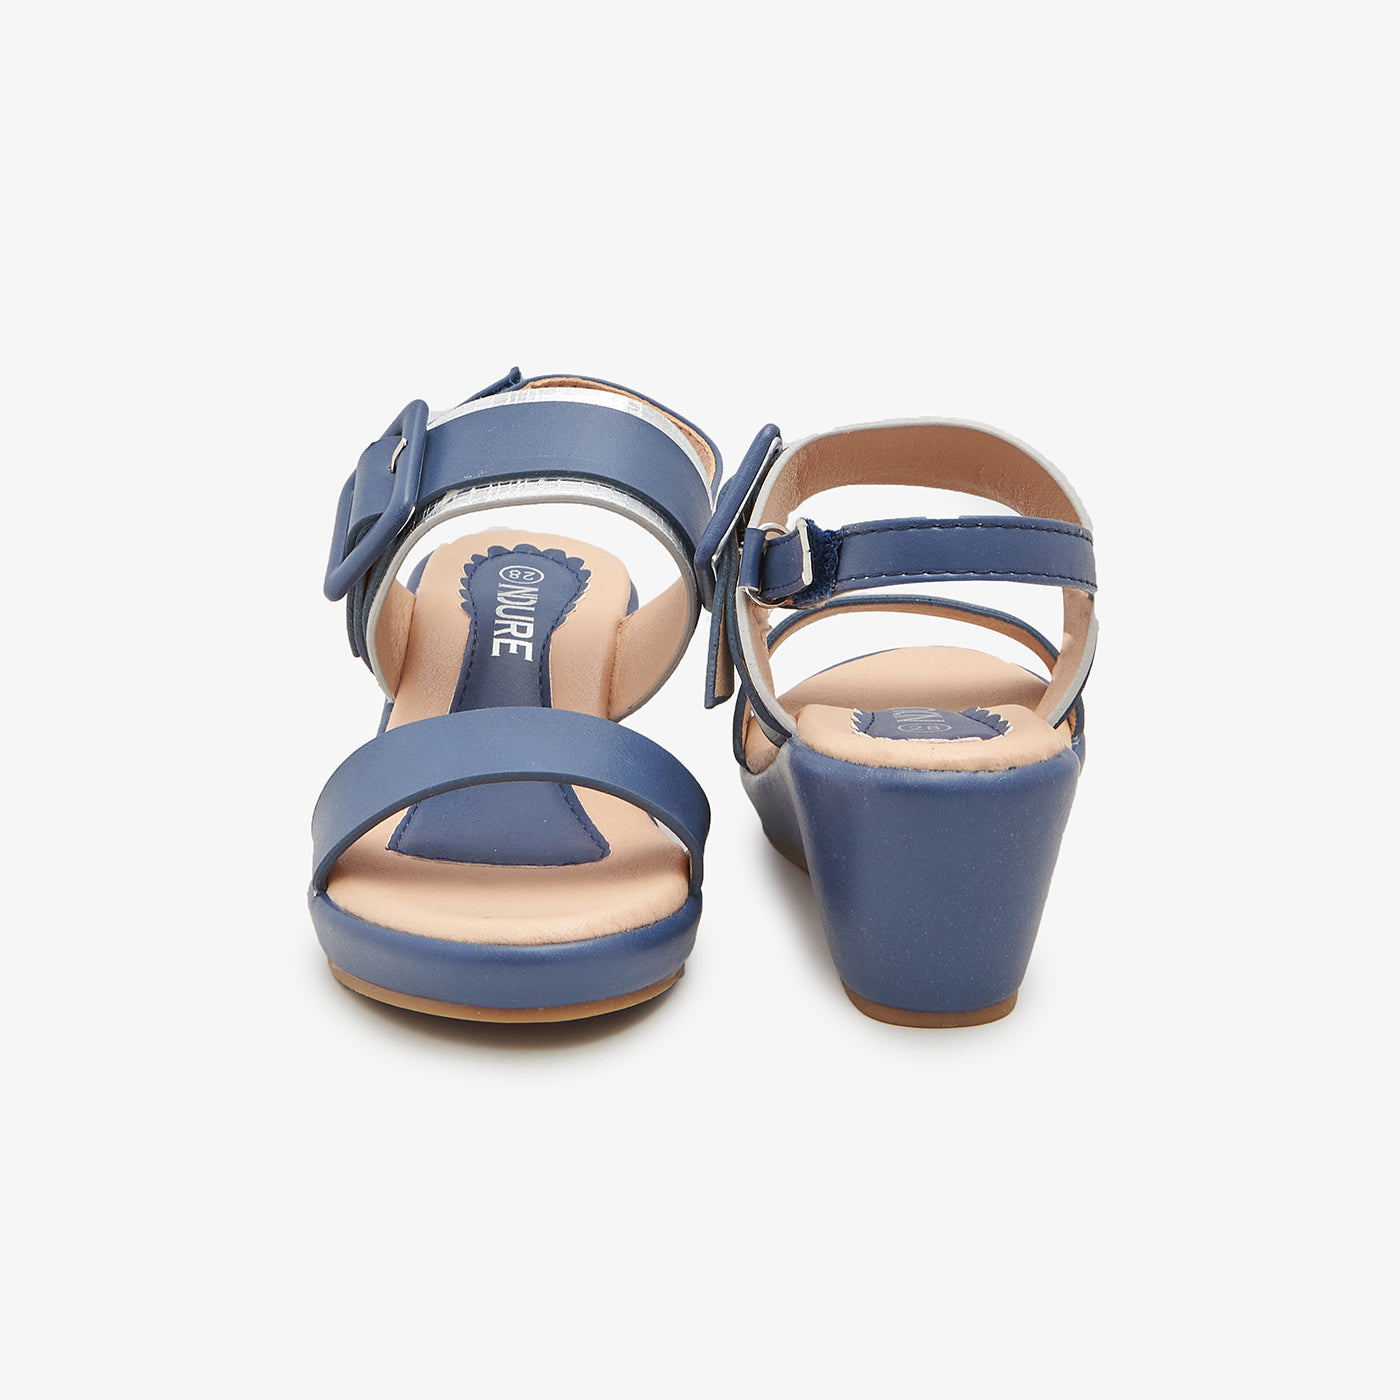 Double Strap Buckled Sandals